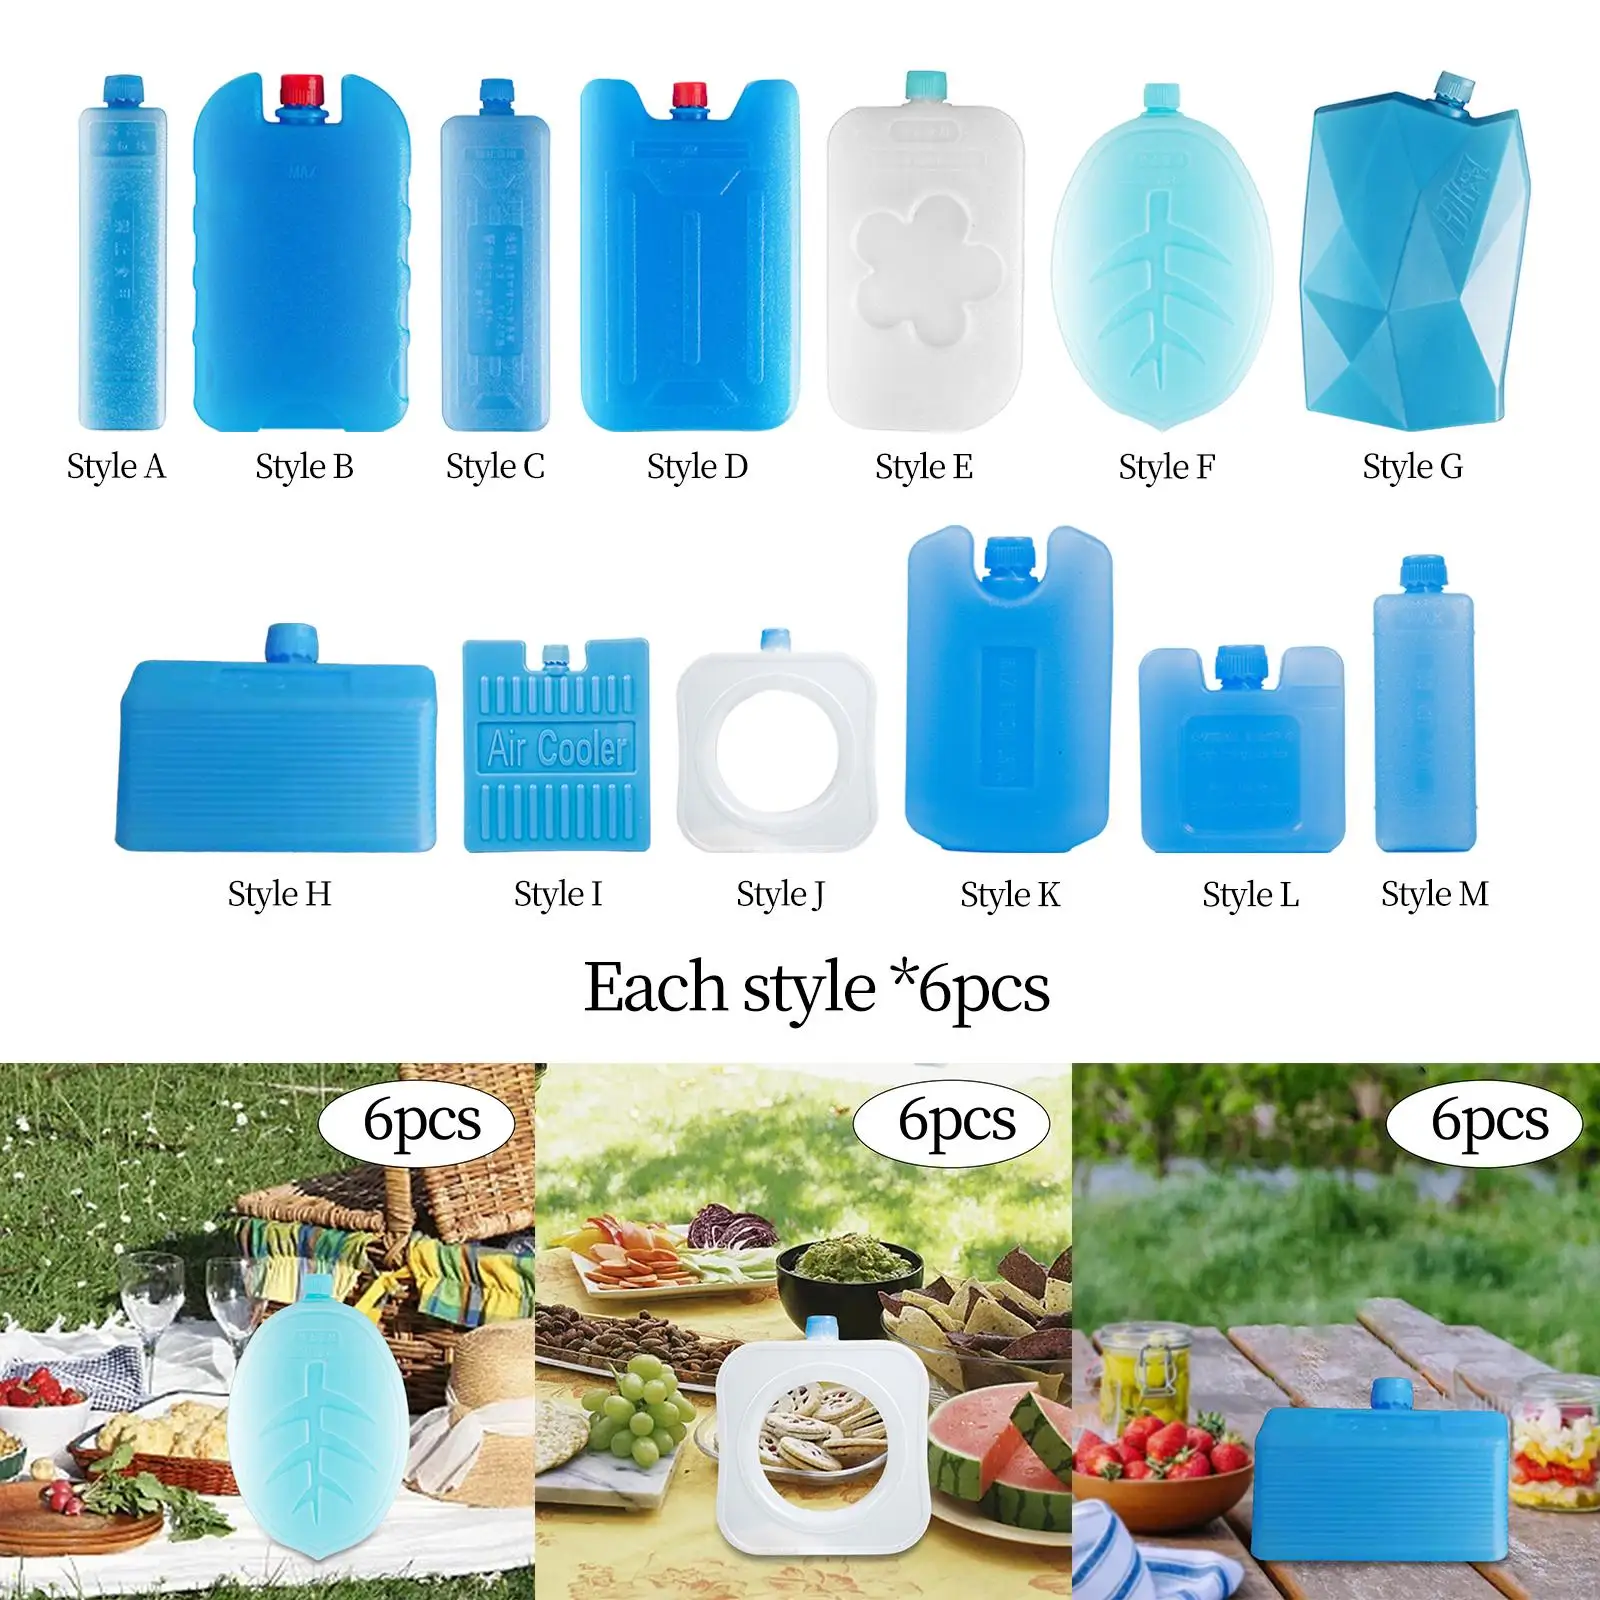 6x Cooling Ice Packs Durable Portable Cooling Elements for Cooler Bags Reusable Ice Blocks Ice Freezer Blocks for Beach Picnic